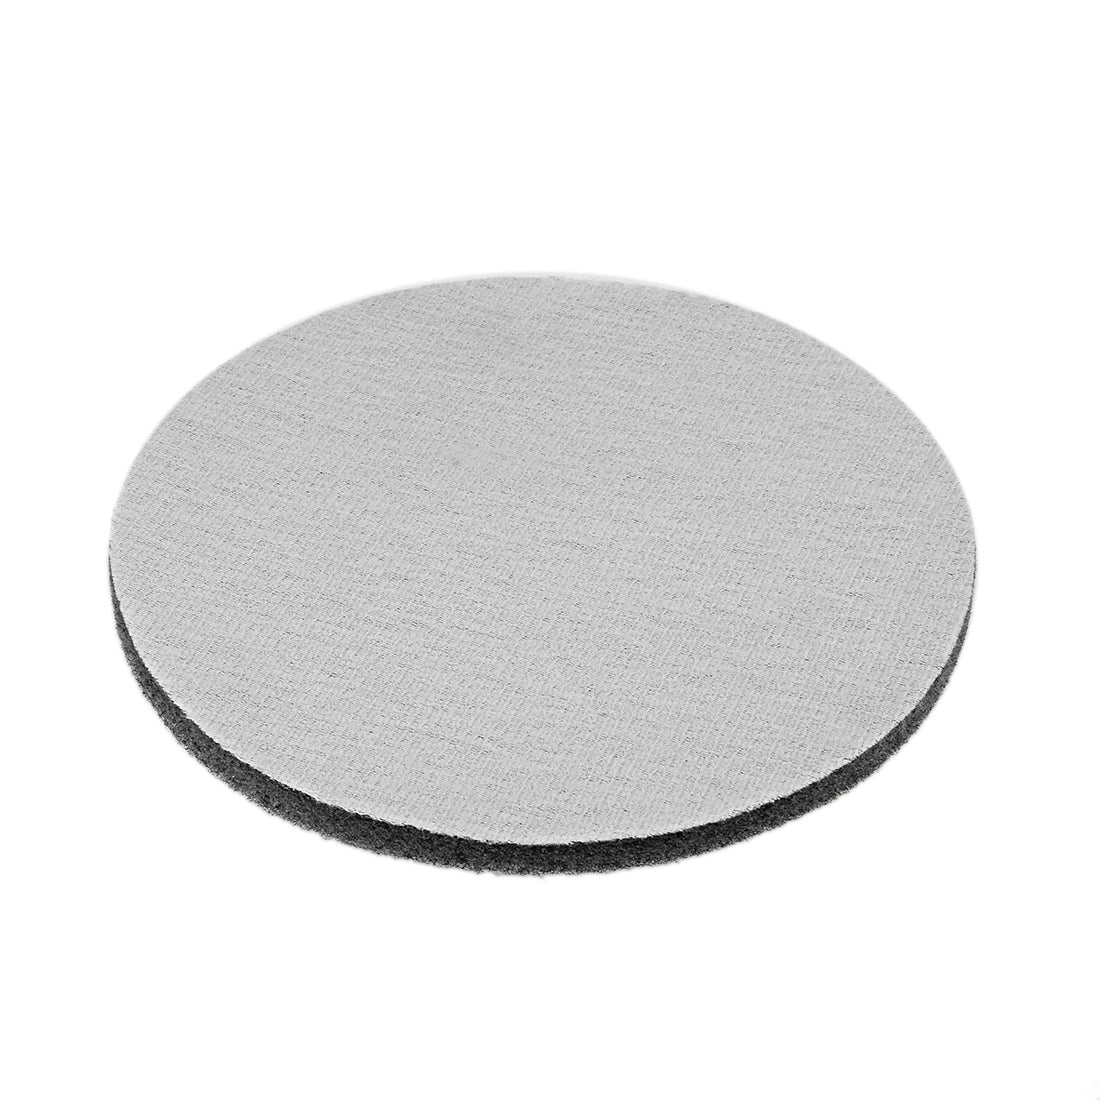 uxcell Uxcell Scrub Pad, 7-inch 1000-Grits Drill Power Brush Tile Scrubber Cleaning Scouring Pads Abrasive Buffing Pads 2pcs